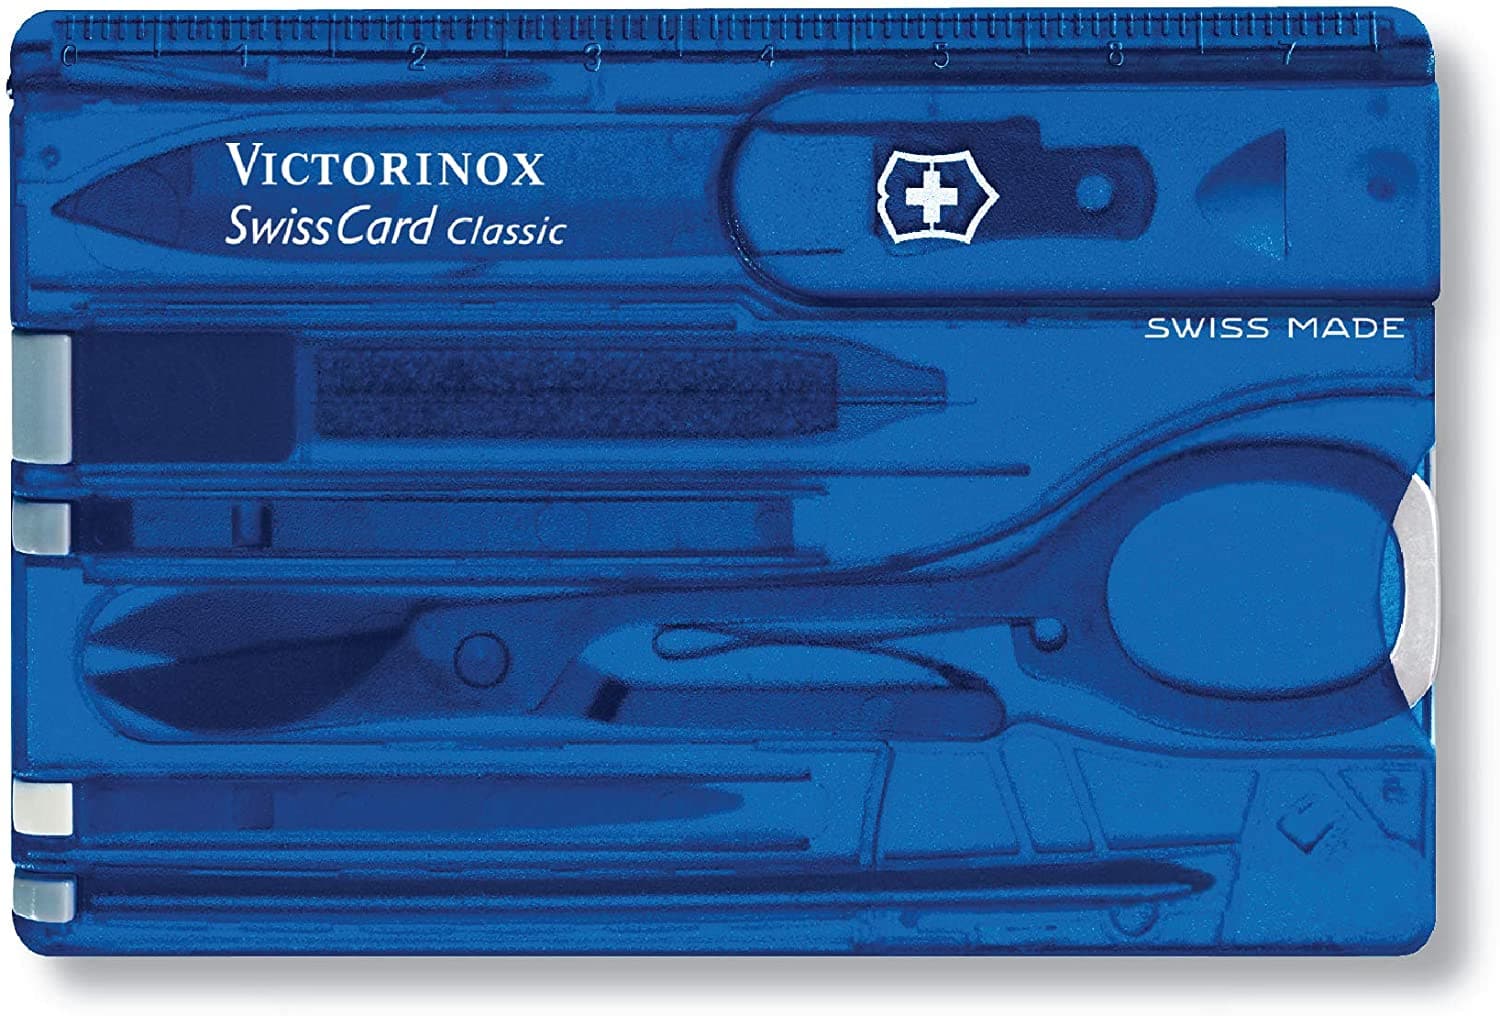 Victorinox Swiss Army Knife Classic Swisscard Sapphire Translucent 82mm With 9 Functions - 0.7122.T2